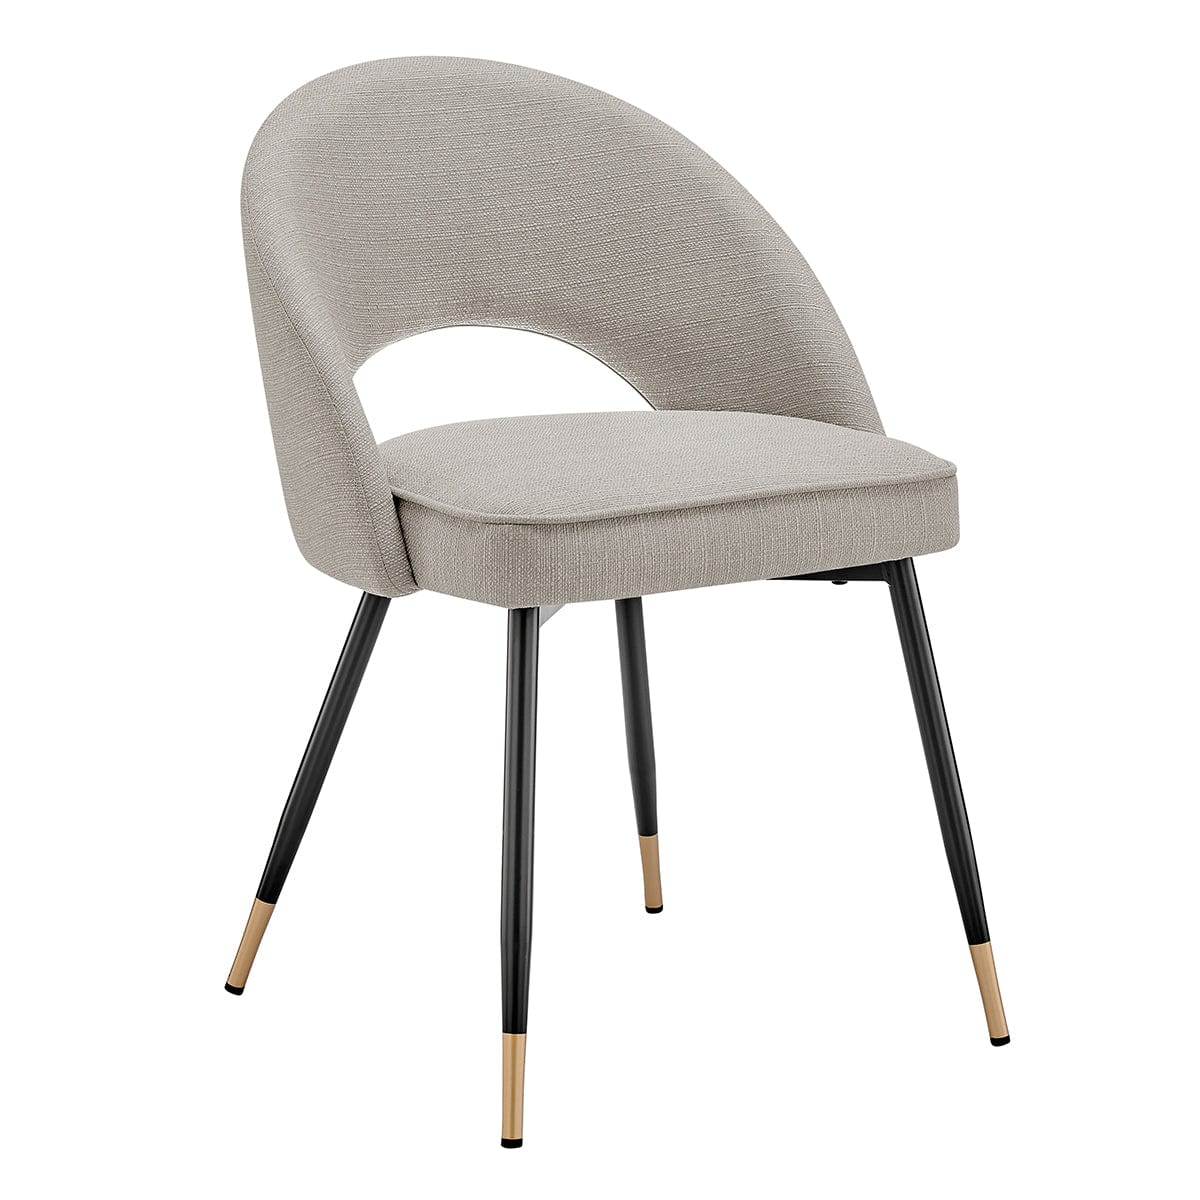 Lola Set of 2 Dining Chairs - Linen Look - Stone Grey - DUSK